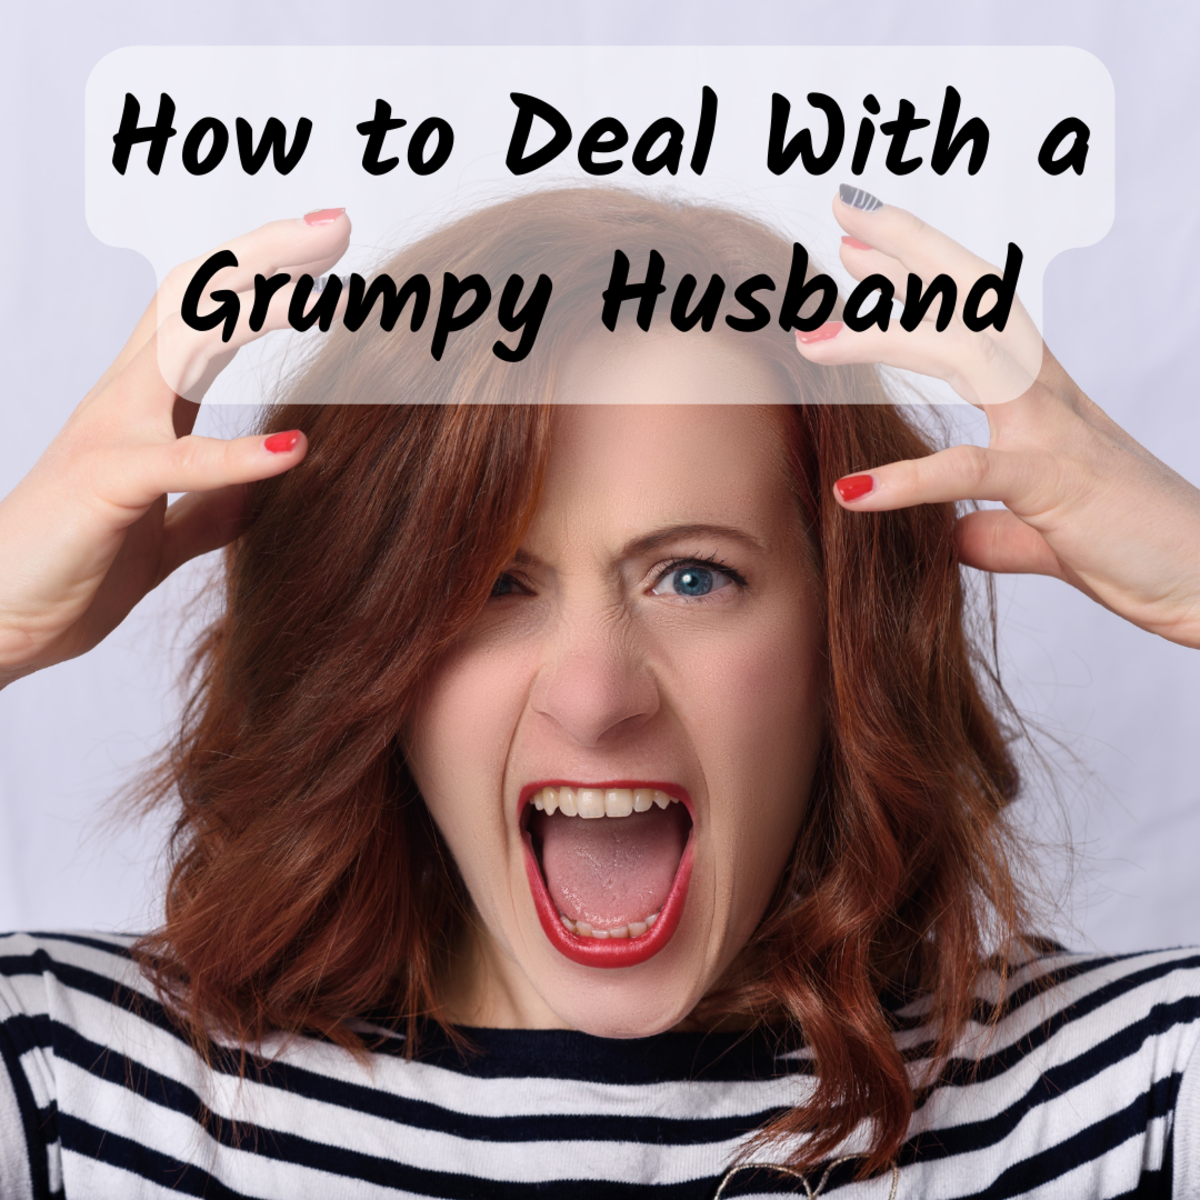 How to Deal With a Cranky, Crabby Husband